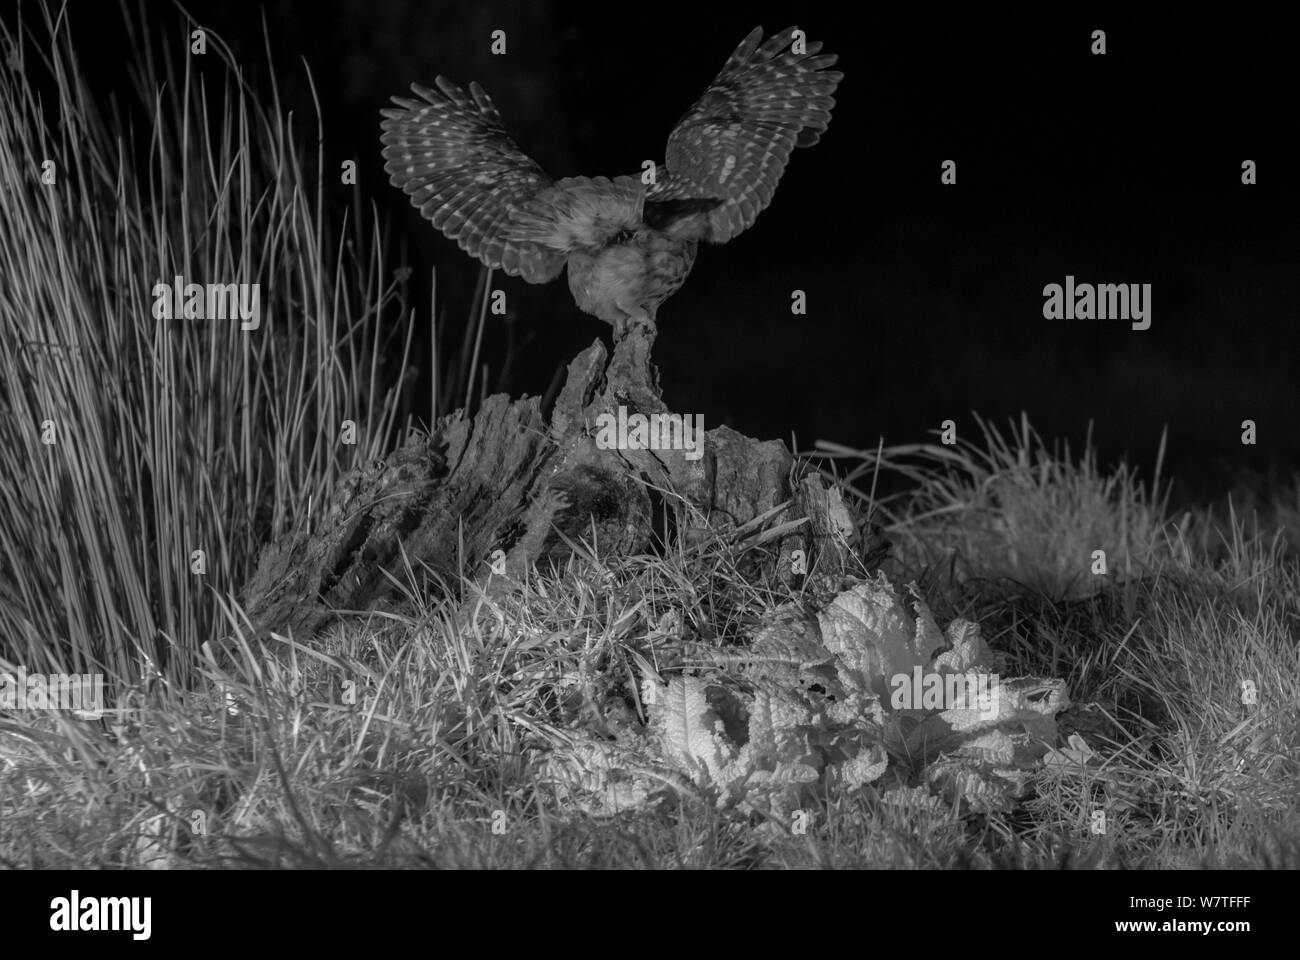 Little owl (Athene noctua) landing on tree stump in garden, taken at night with infra red remote camera trap, Mayenne, Pays de Loire, France. Stock Photo